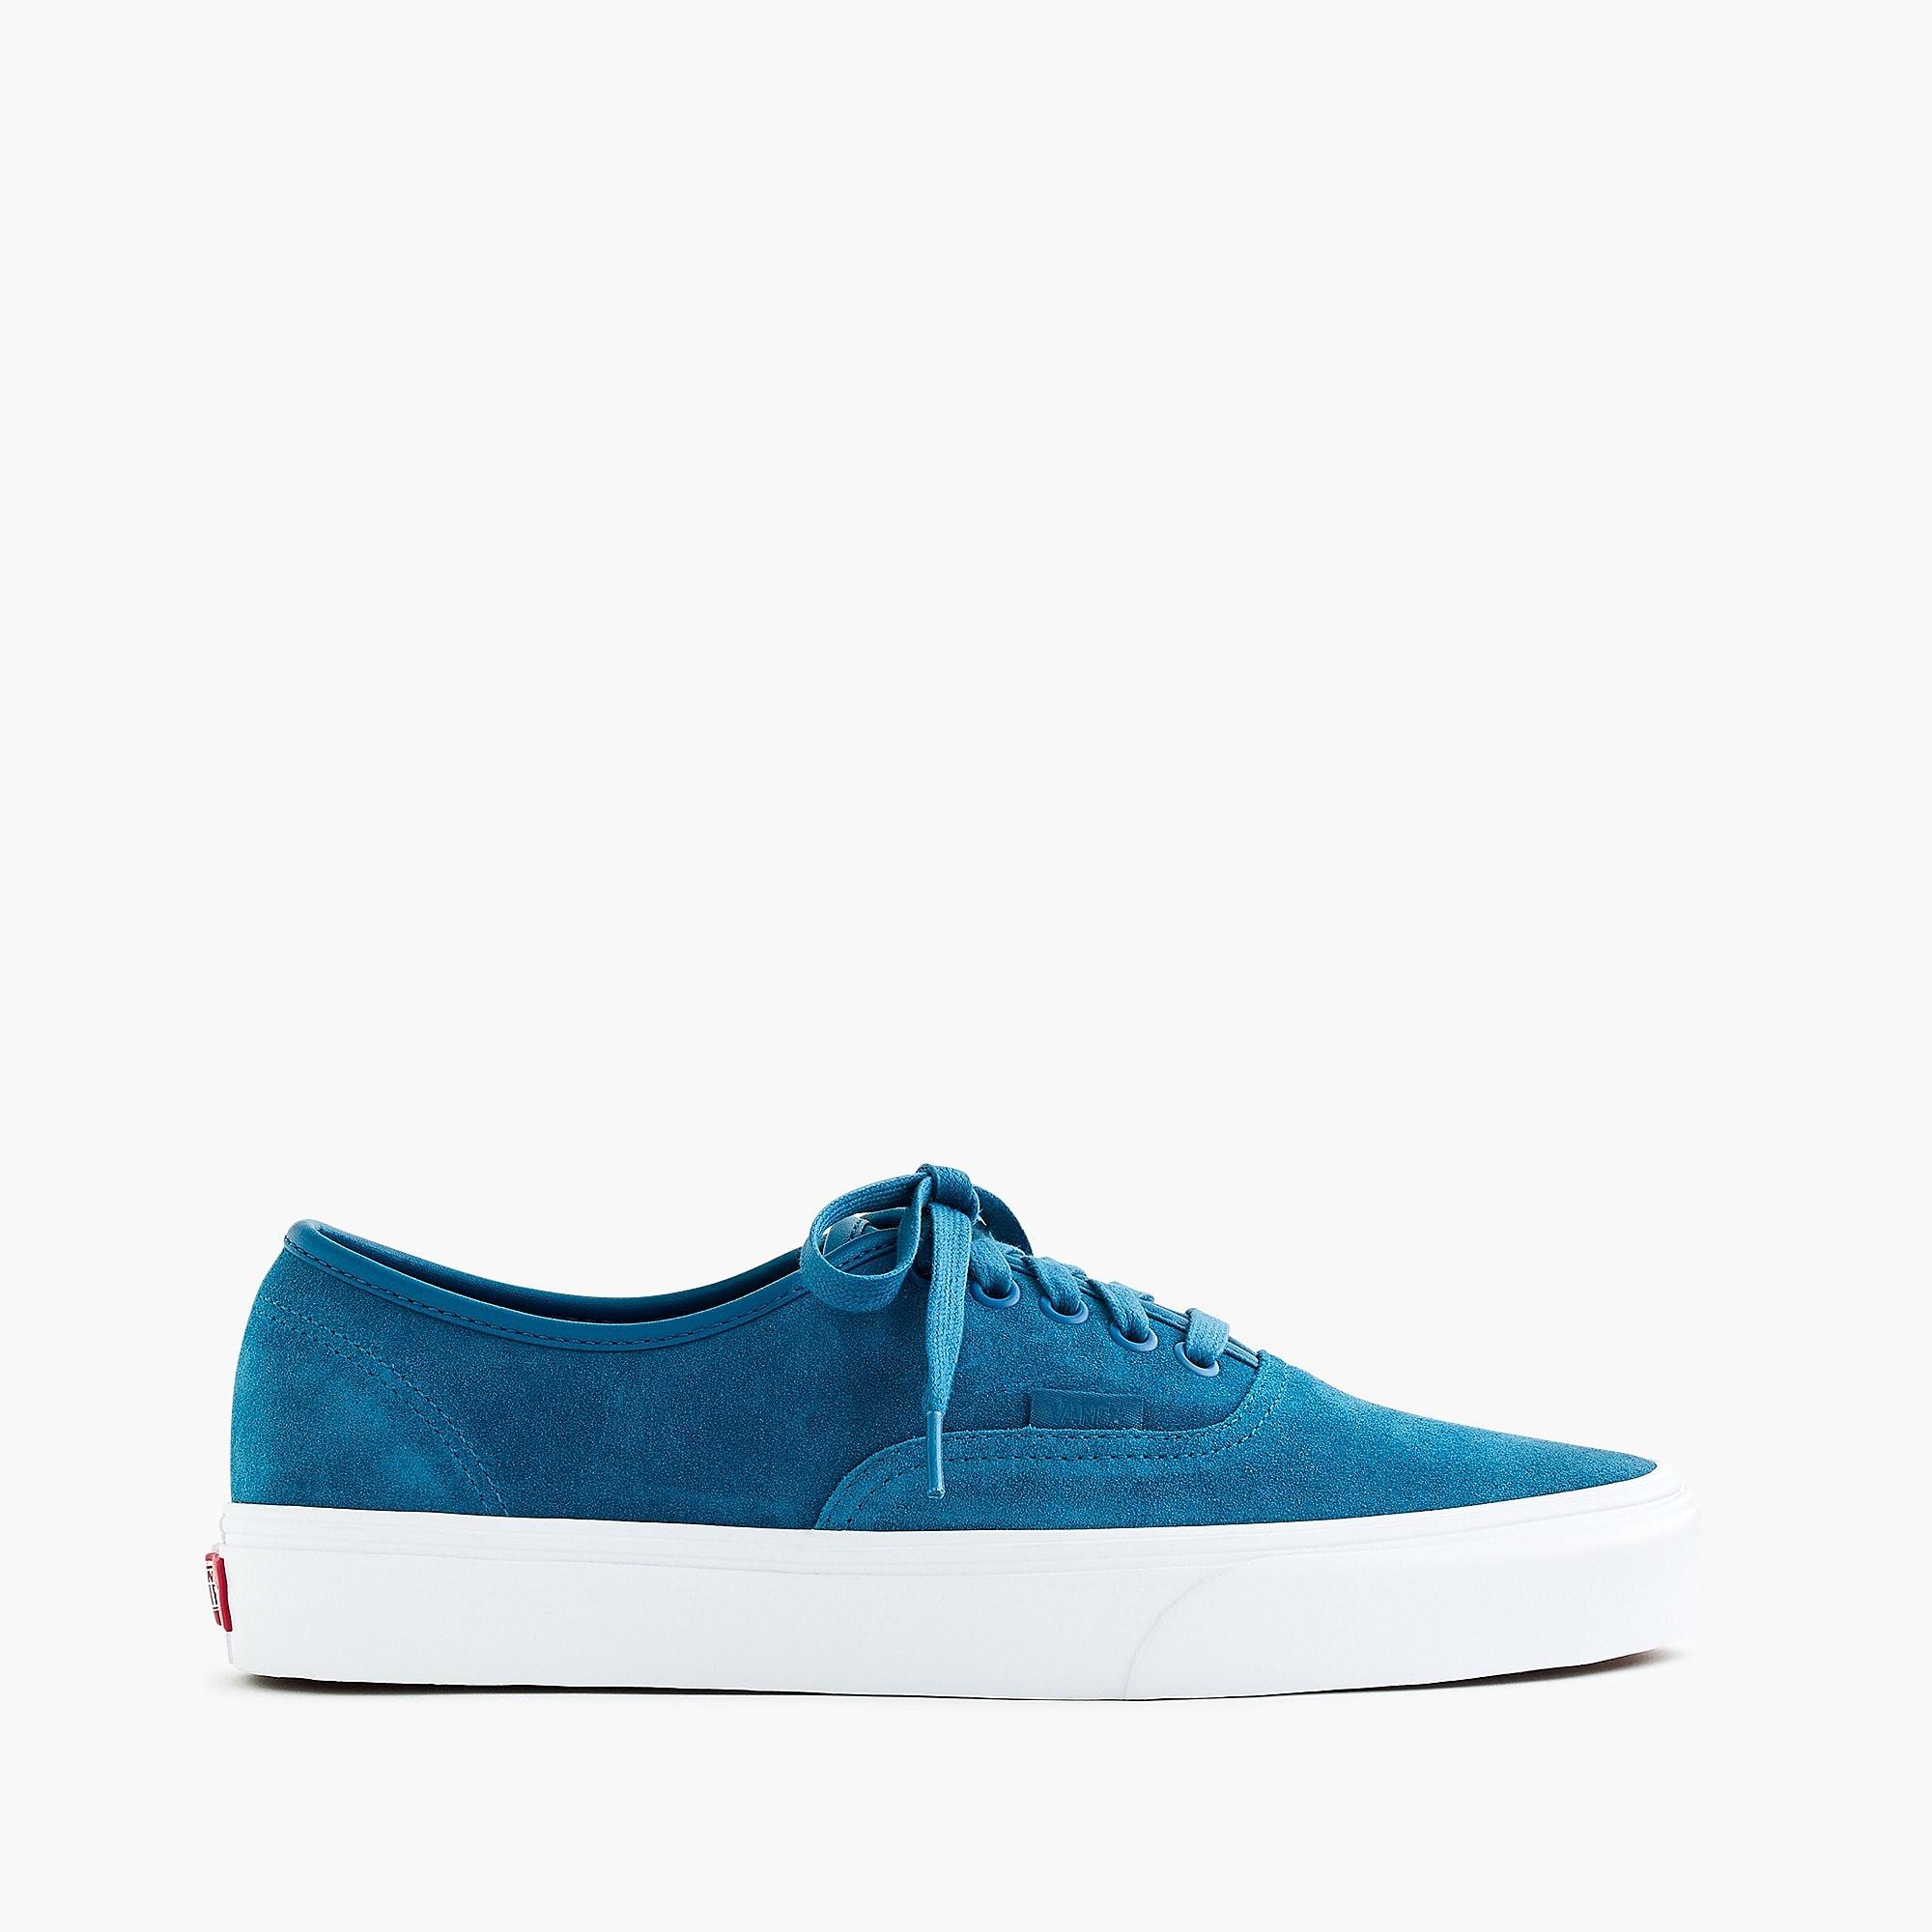 Vans Soft Suede Authentic Sneakers in Blue Sapphire (Blue) for Men - Lyst